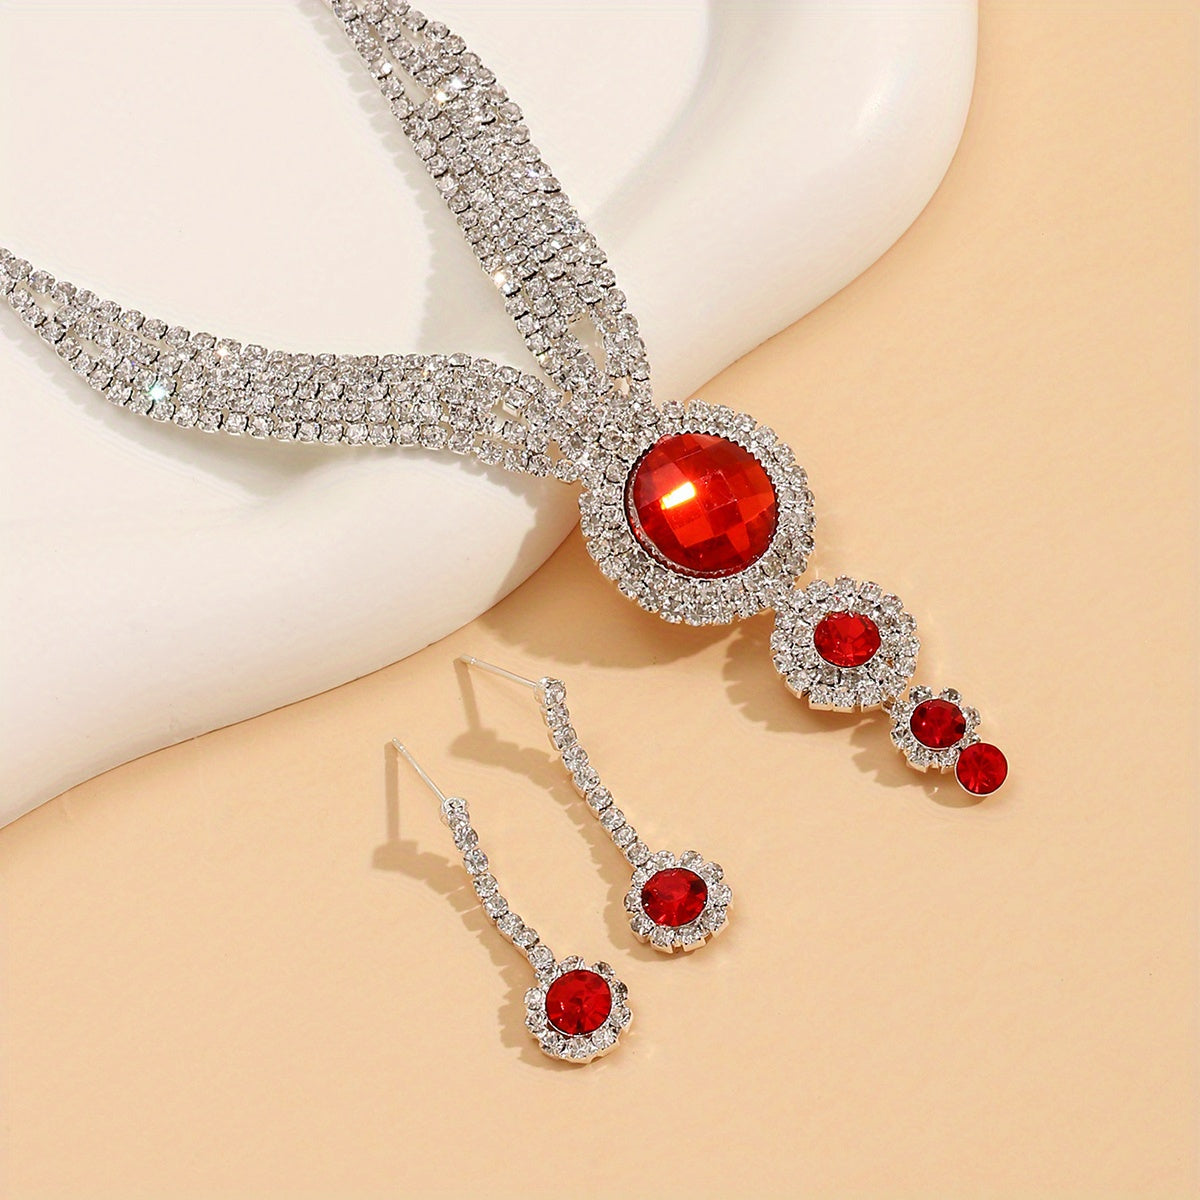 Elegant Wedding Photography Jewelry Set - Pendant Necklace and Drop Earrings for Stunning Photos and Memorable Moments